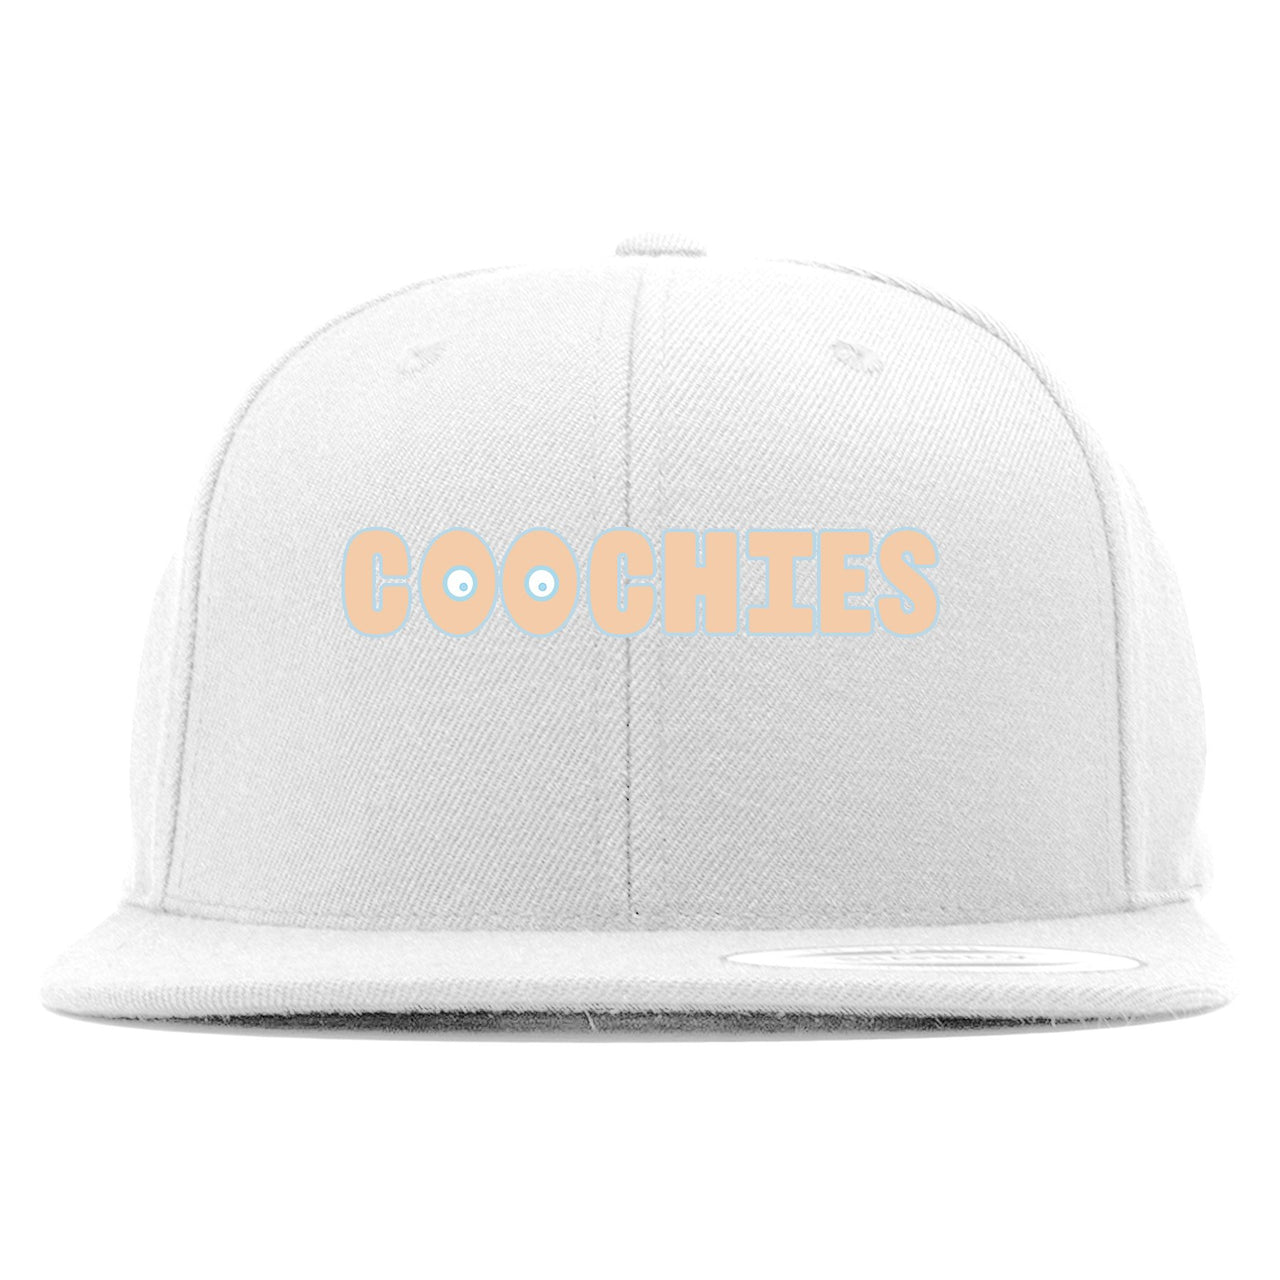 Hyperspace 350s Snapback | Coochies, White